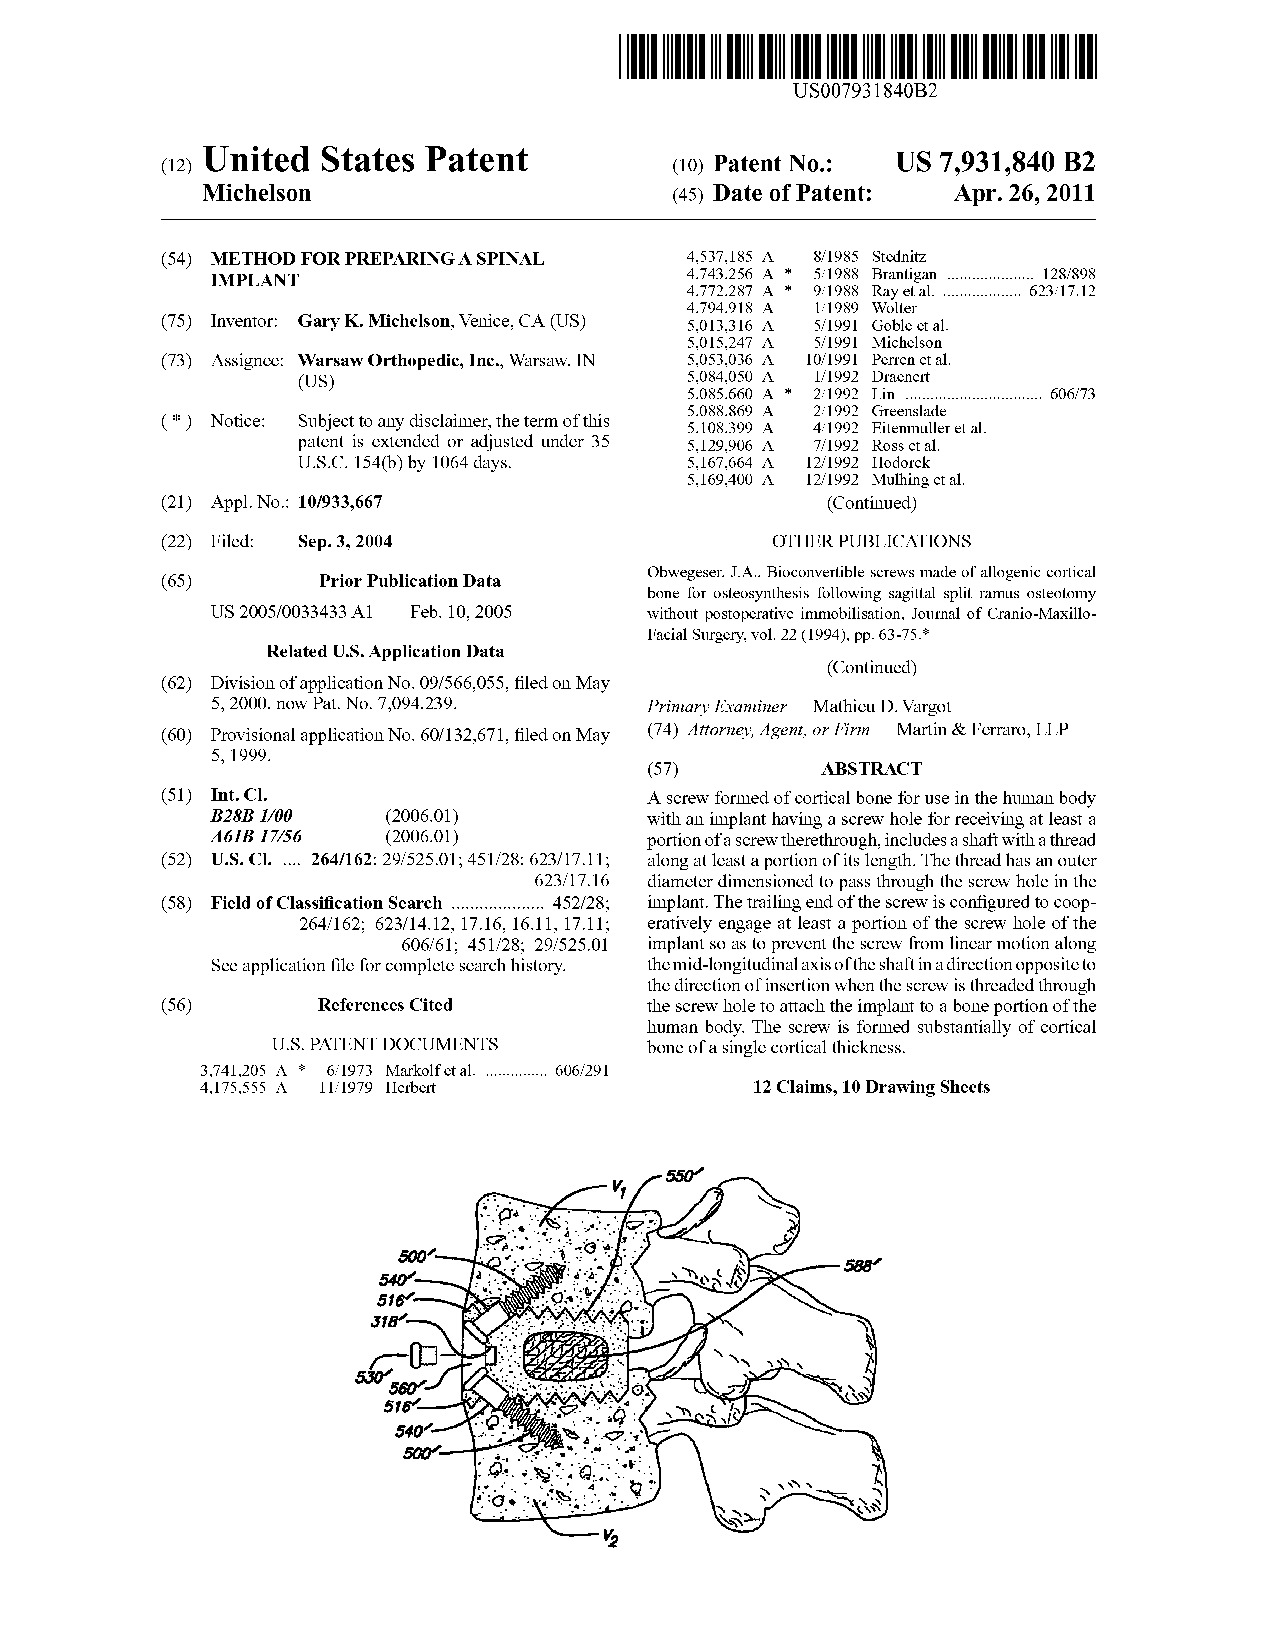 Method for preparing a spinal implant - Patent 7,931,840